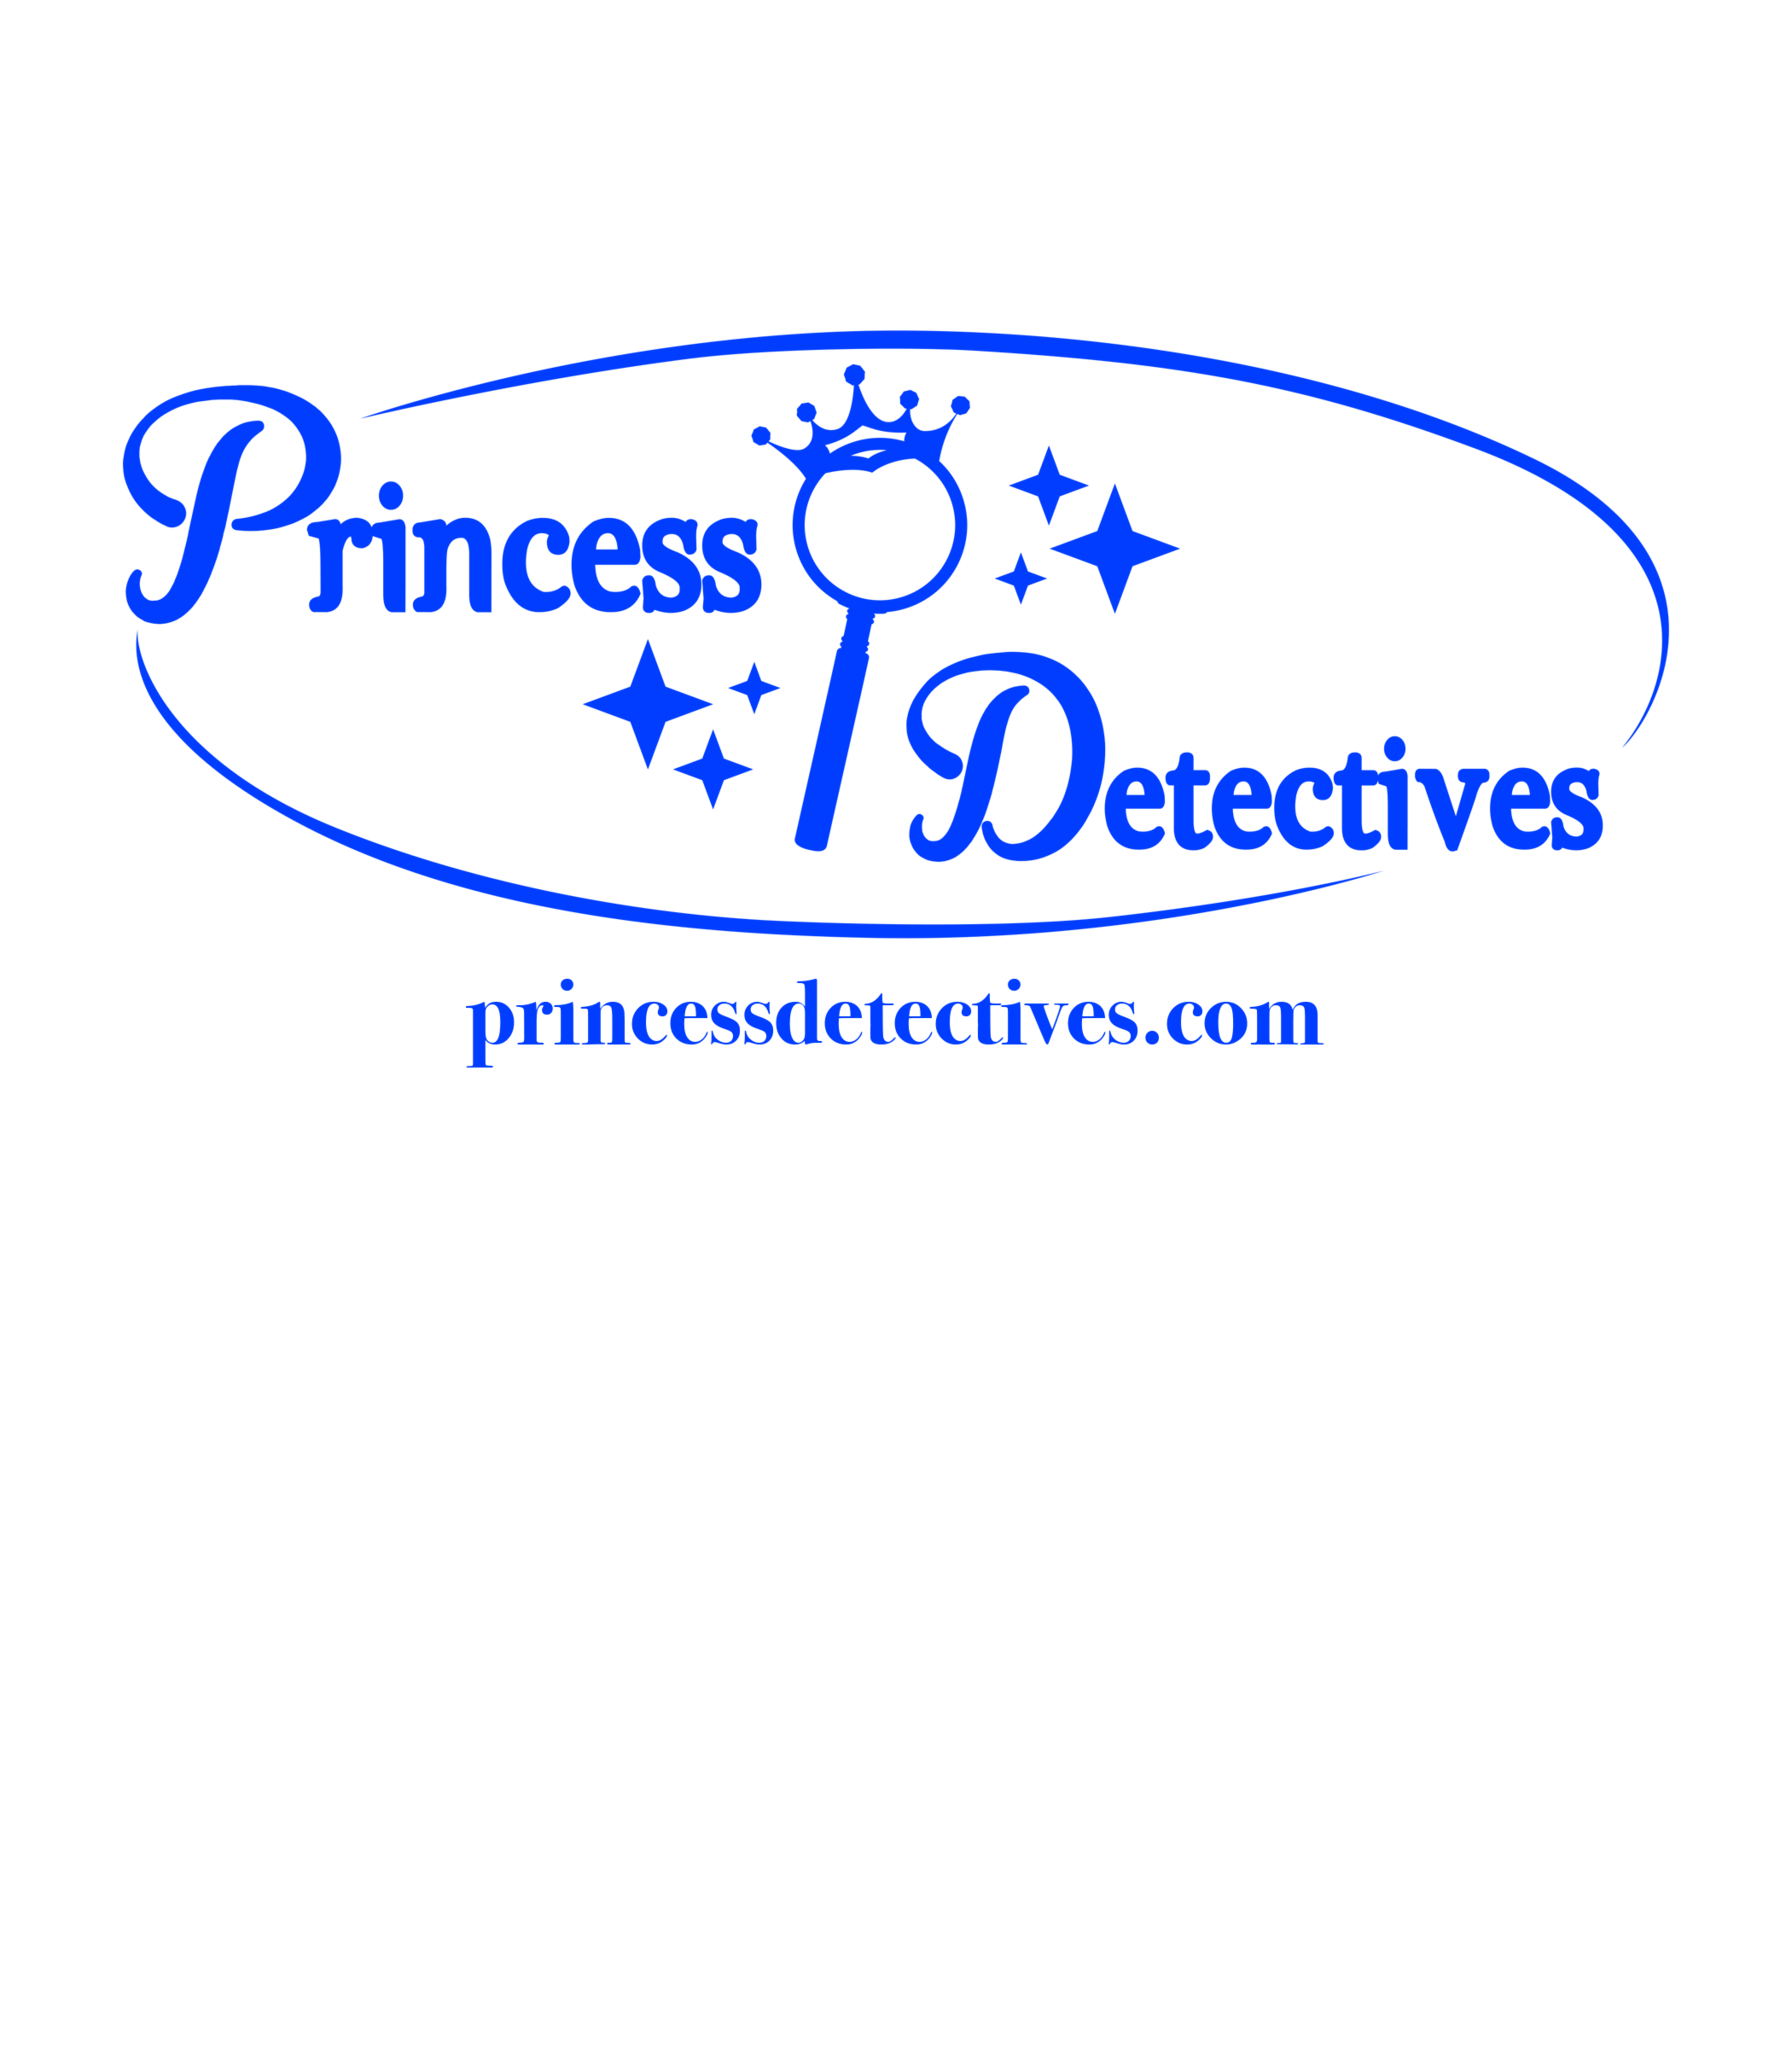 White On Blue Logo - Princess Detectives Fitted Shirt- White with Blue Logo